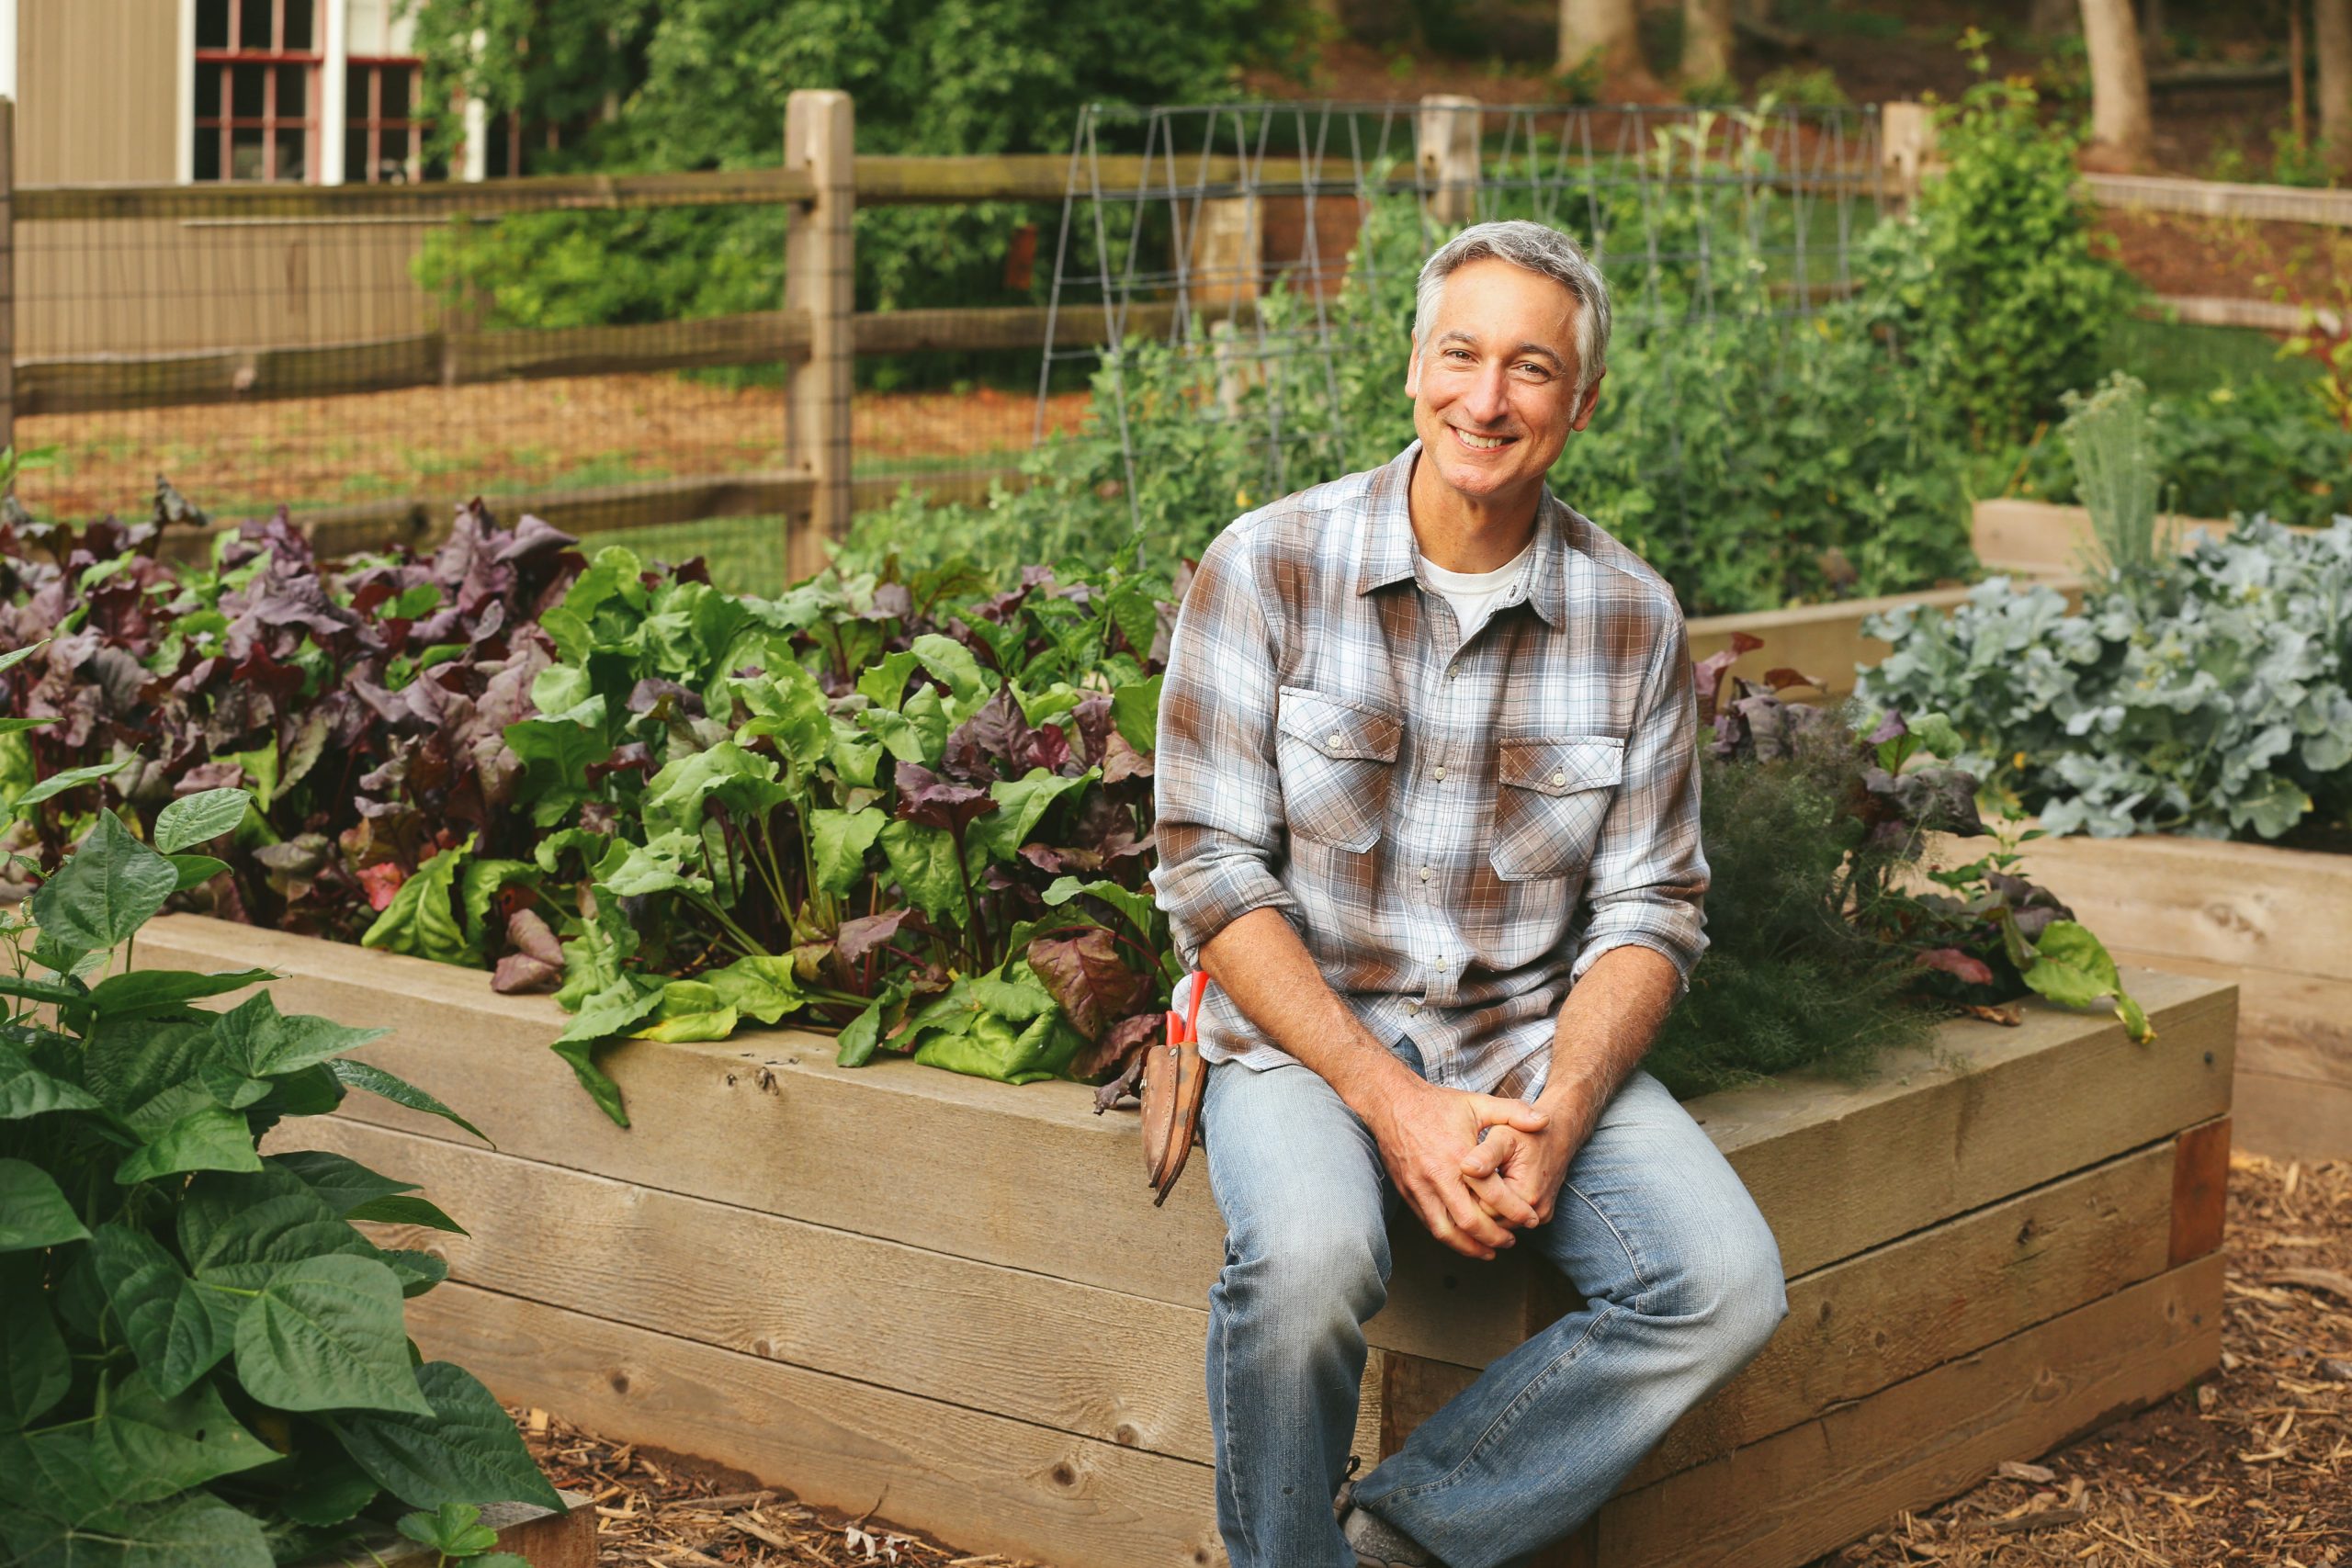 You are currently viewing Podcast: Vegetable Gardening with Joe Lamp’l